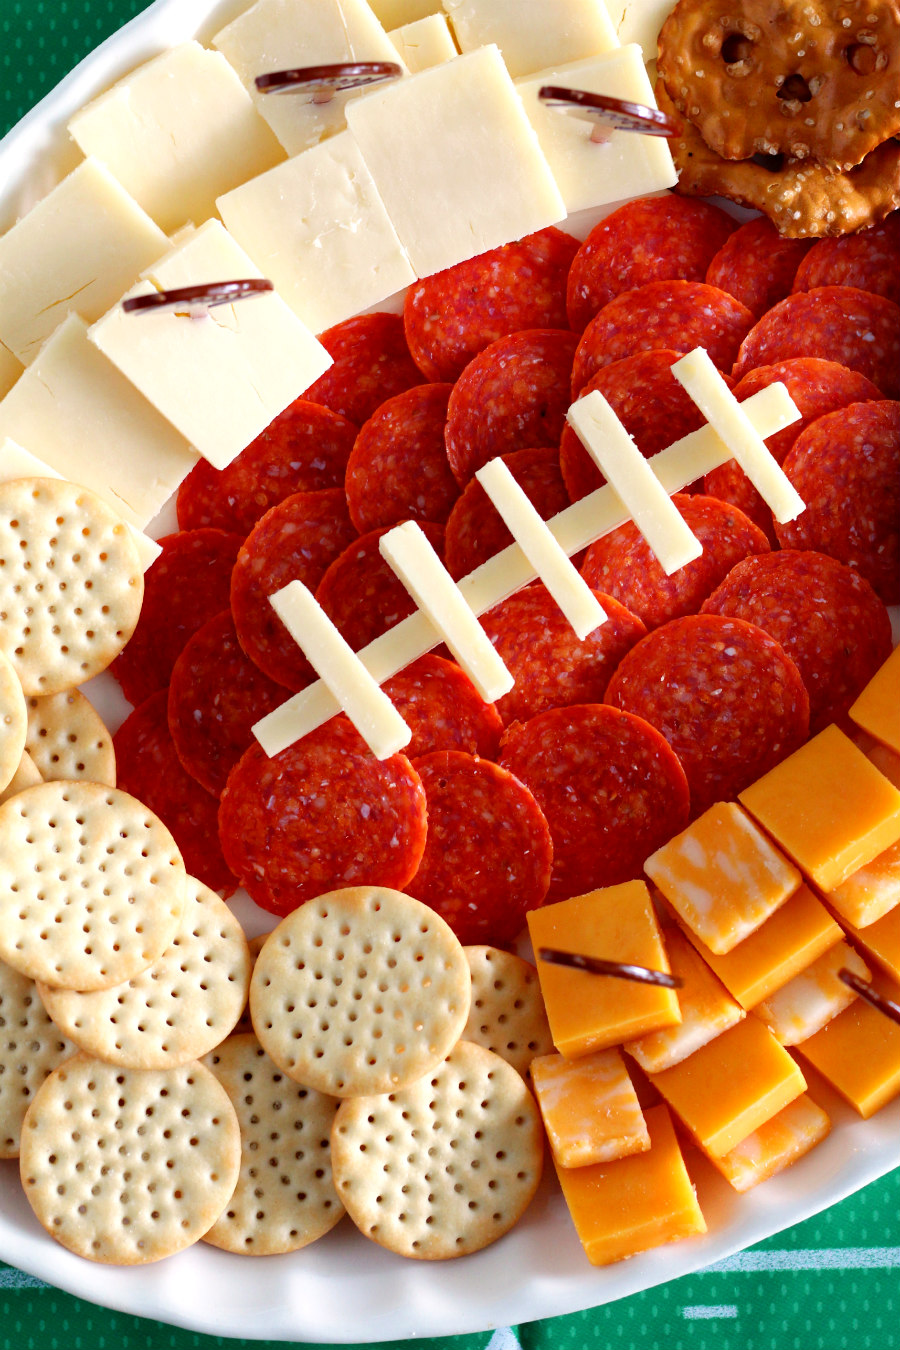 Affordable entertaining during football season isn't that hard when you bust out this Football Charcuterie Platter! This simple tailgating appetizer is sure to score a touchdown with party guests.